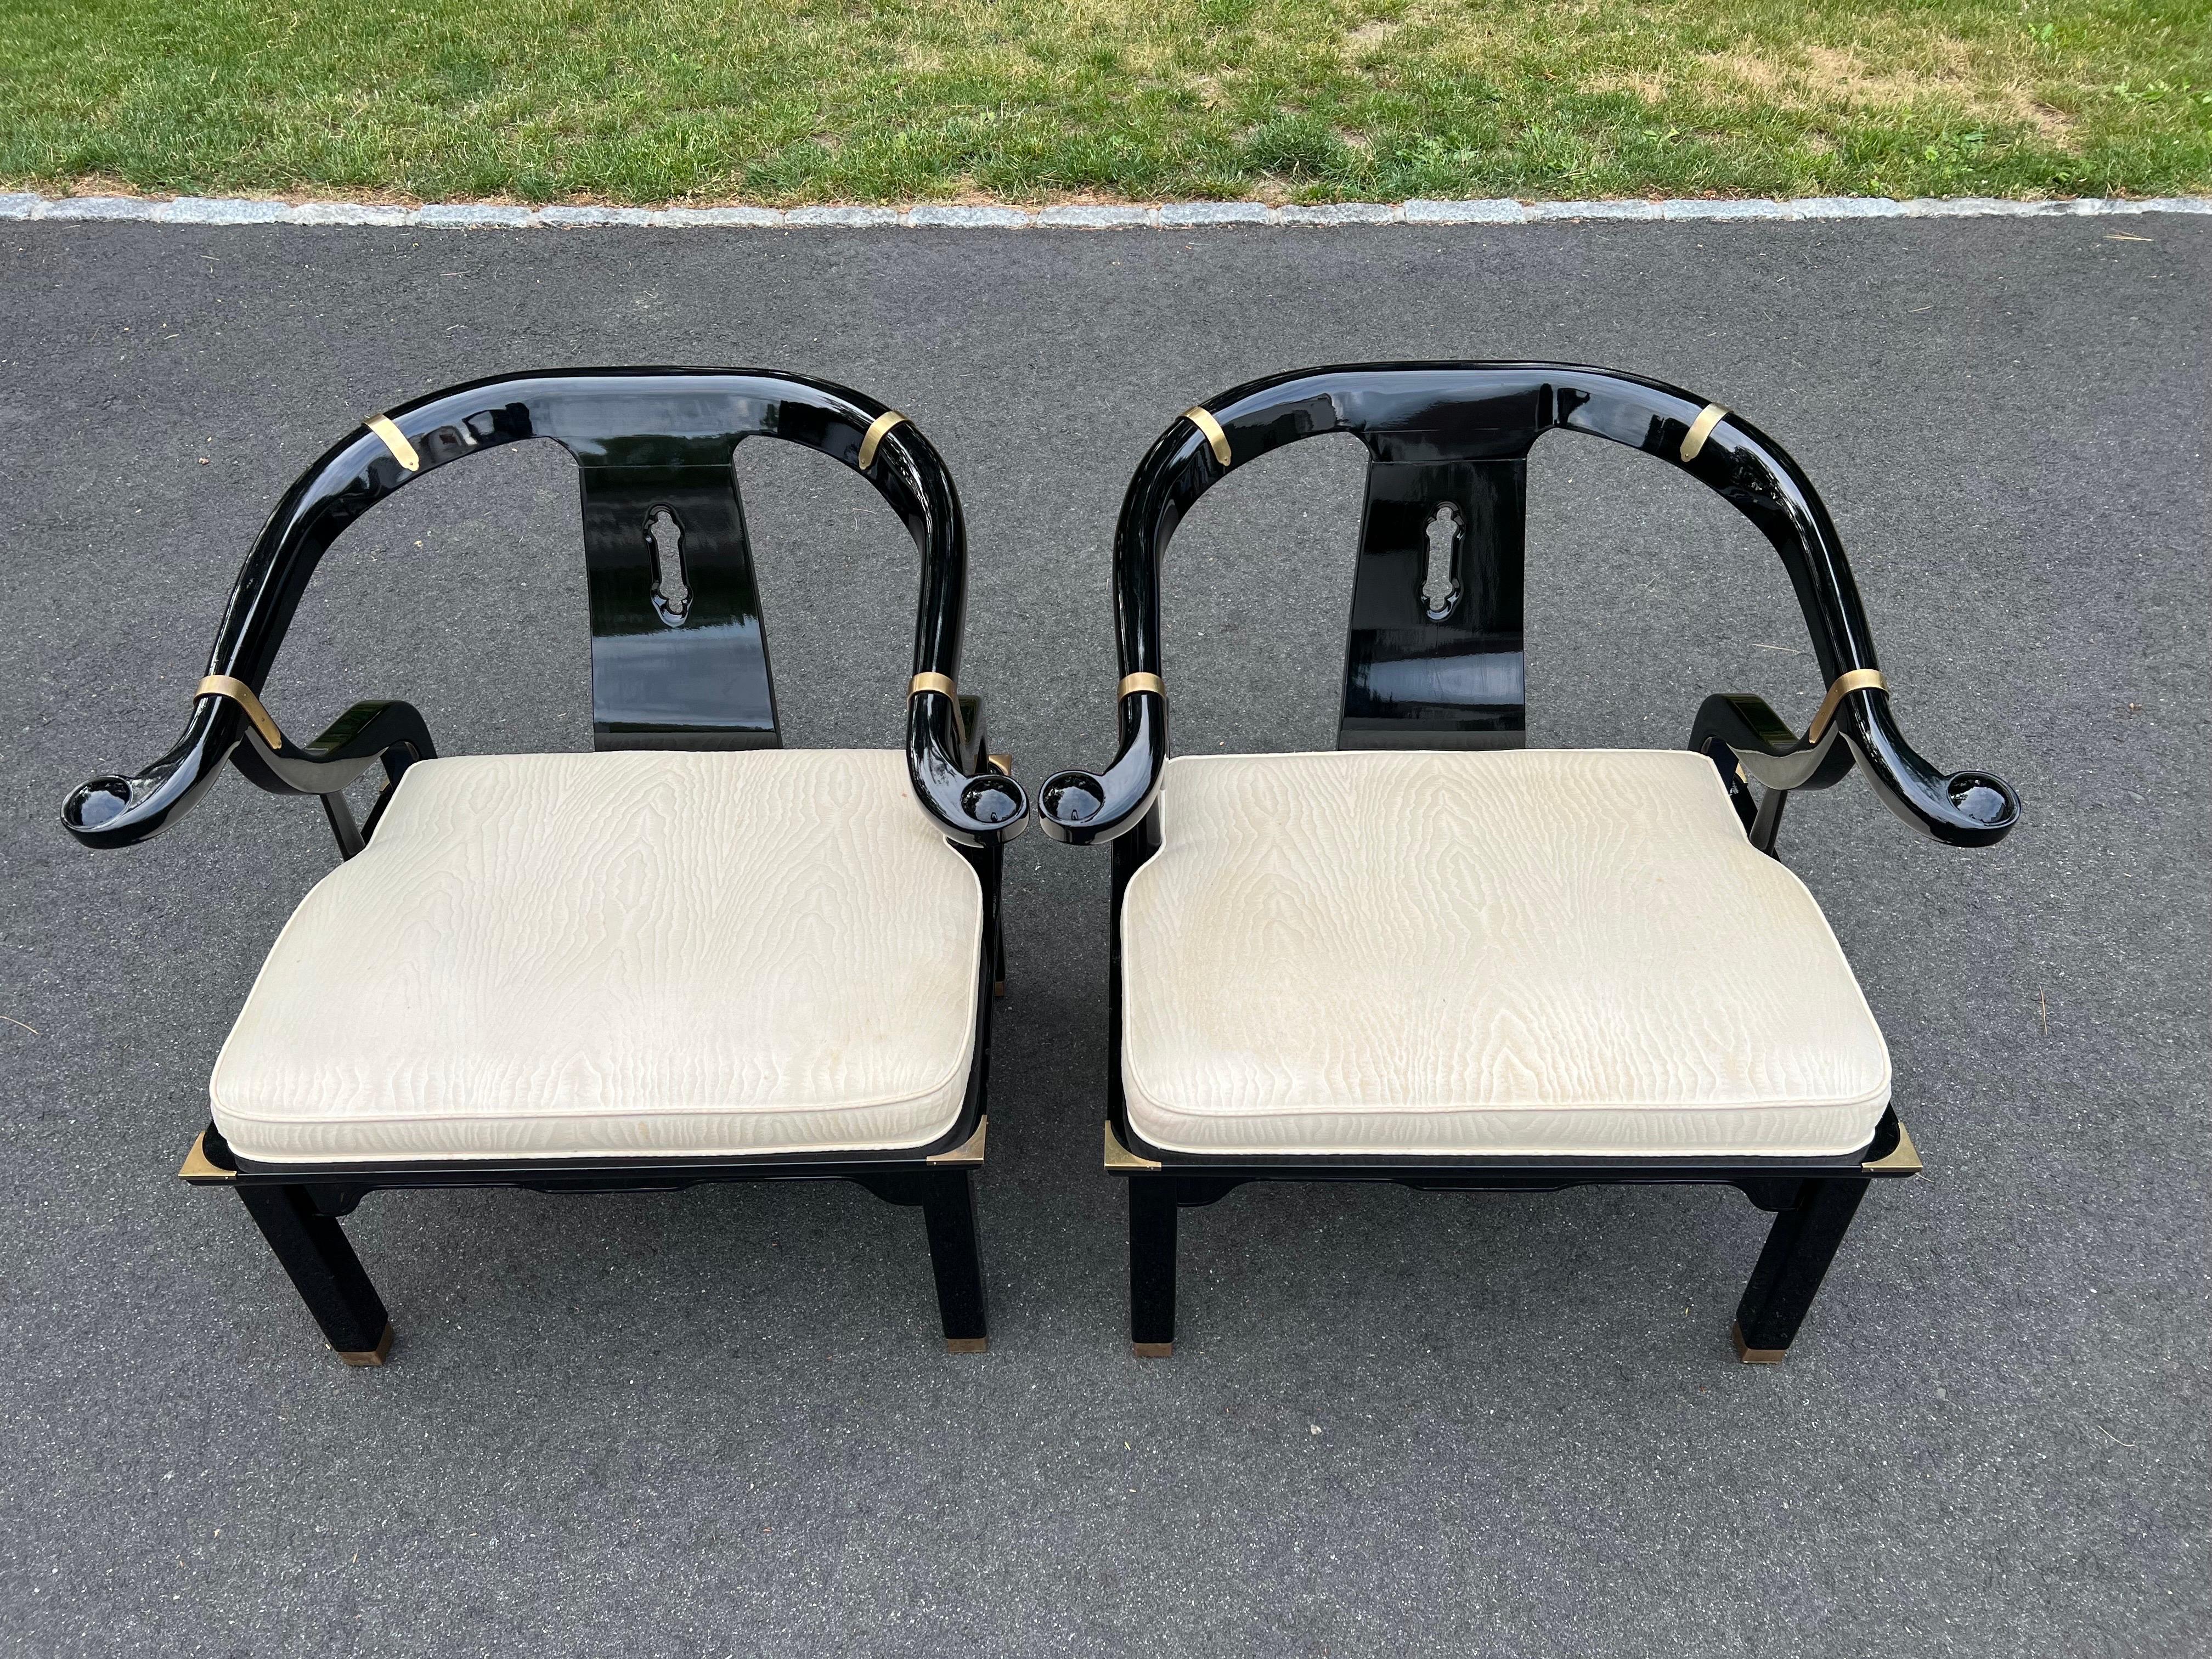 Pair of James Mont for Century Lacquered Horseshoe Chairs. Classic Asian Ming design with brass accents. The quintessential designer chairs with cream upholstered seats.